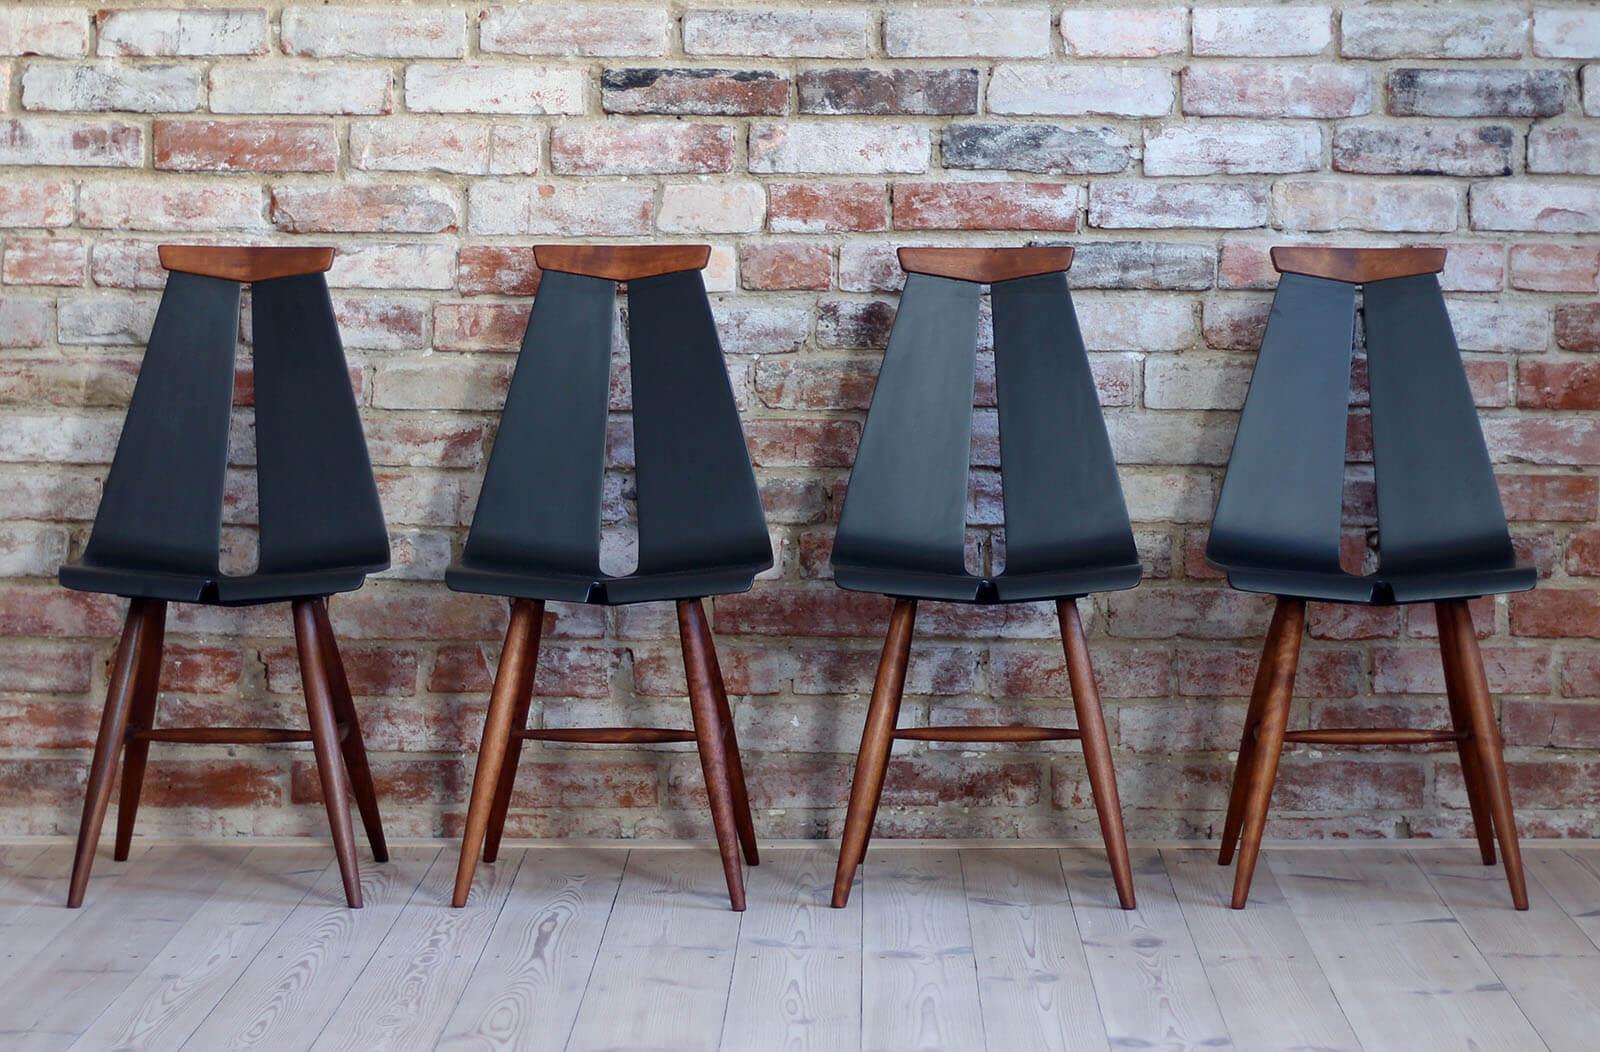 This set of four vintage dining chairs was designed by Risto Halme in the 1960s. Produced by Isku Finland. These original Isku chairs are simple and light but have an elegant and playful design. The curved wood on the back presents two slats which